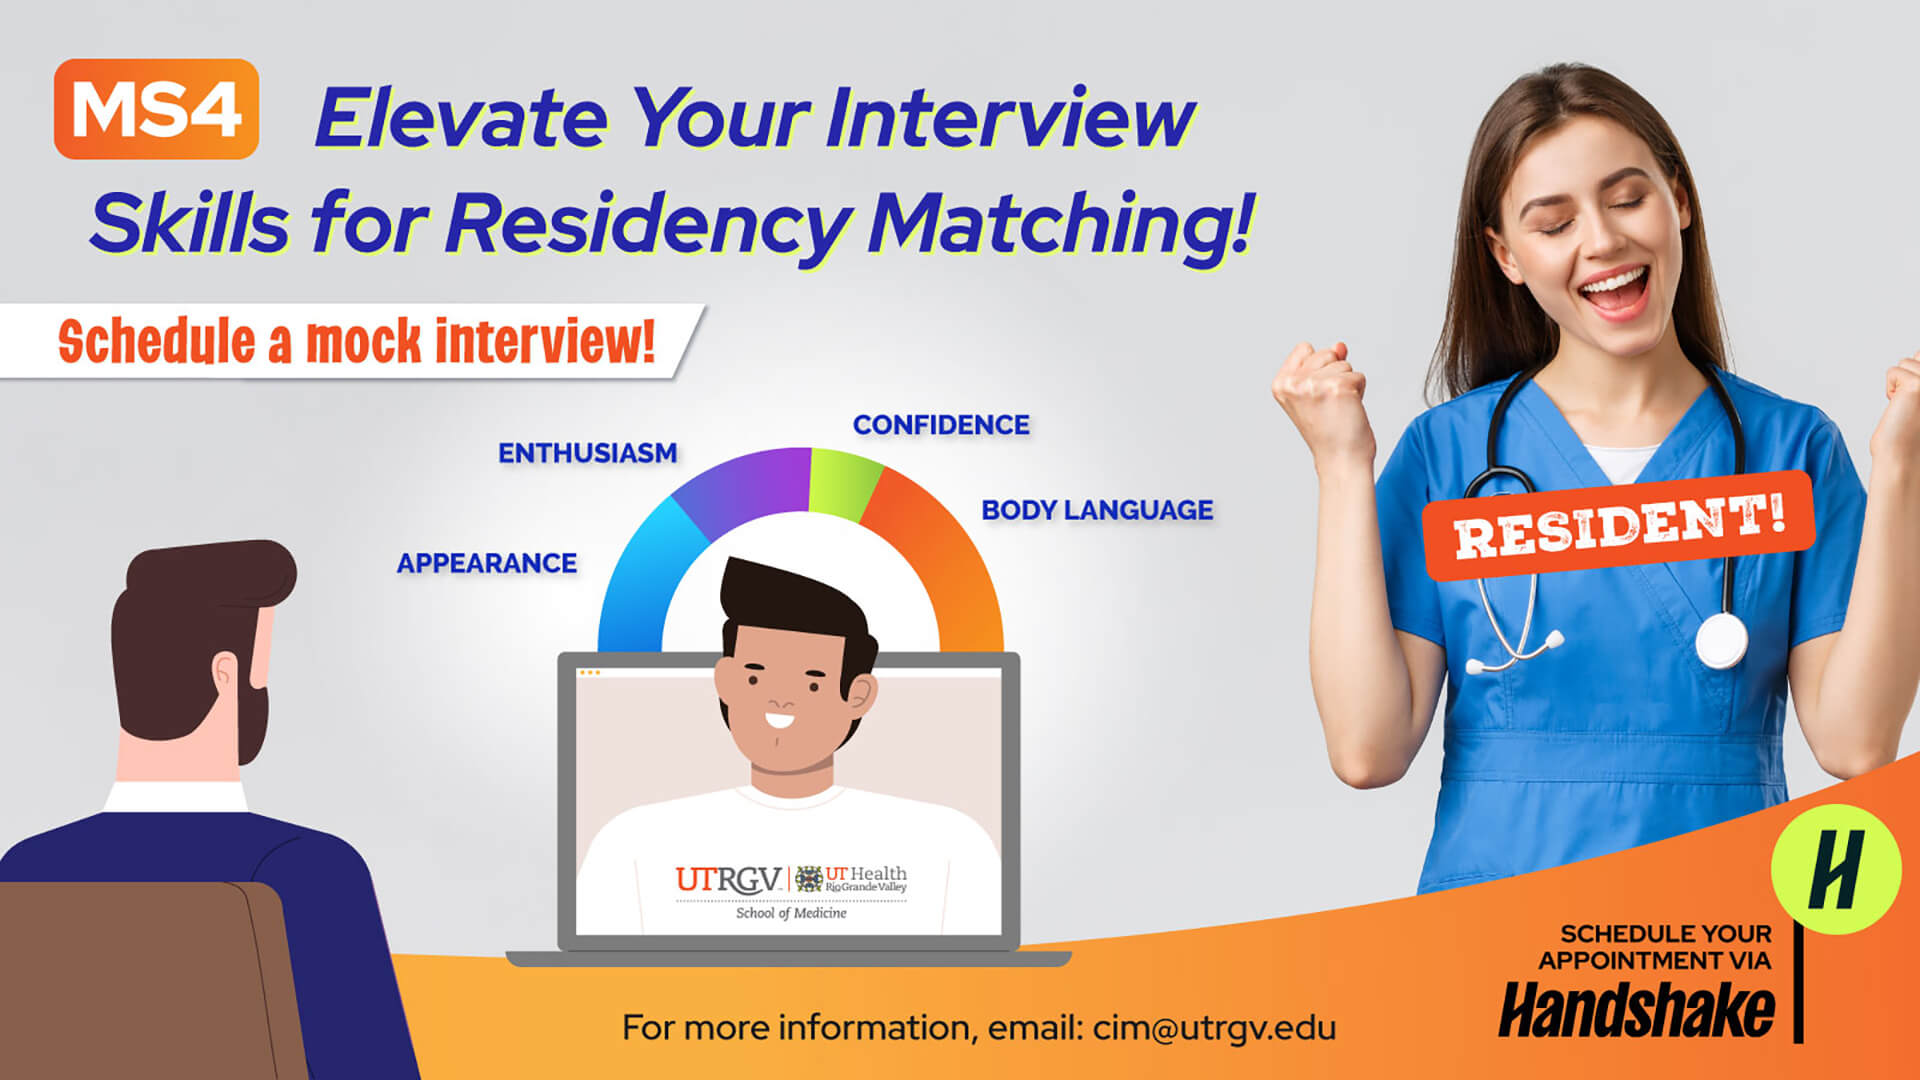 Elevate Your Interview Skills for Residency Matching - Schedule a mock interview through handshake Page Banner 